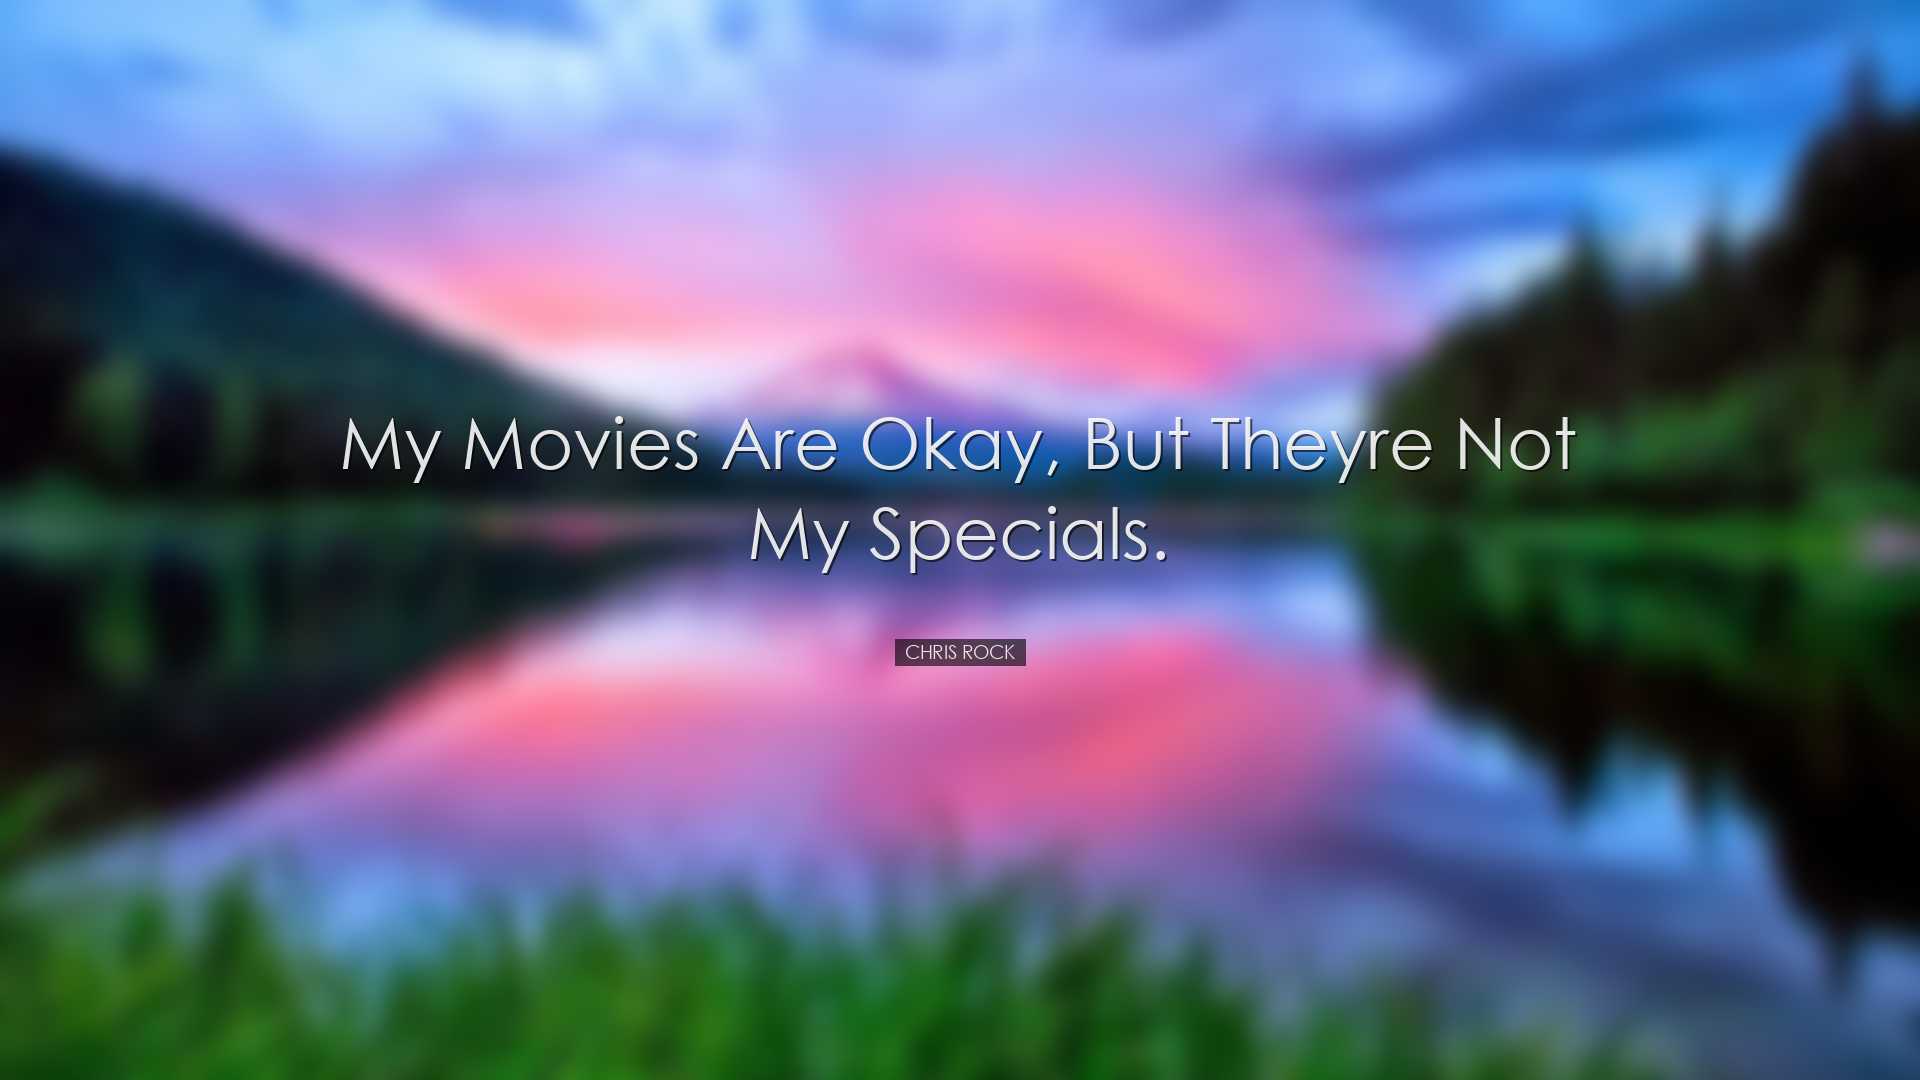 My movies are okay, but theyre not my specials. - Chris Rock